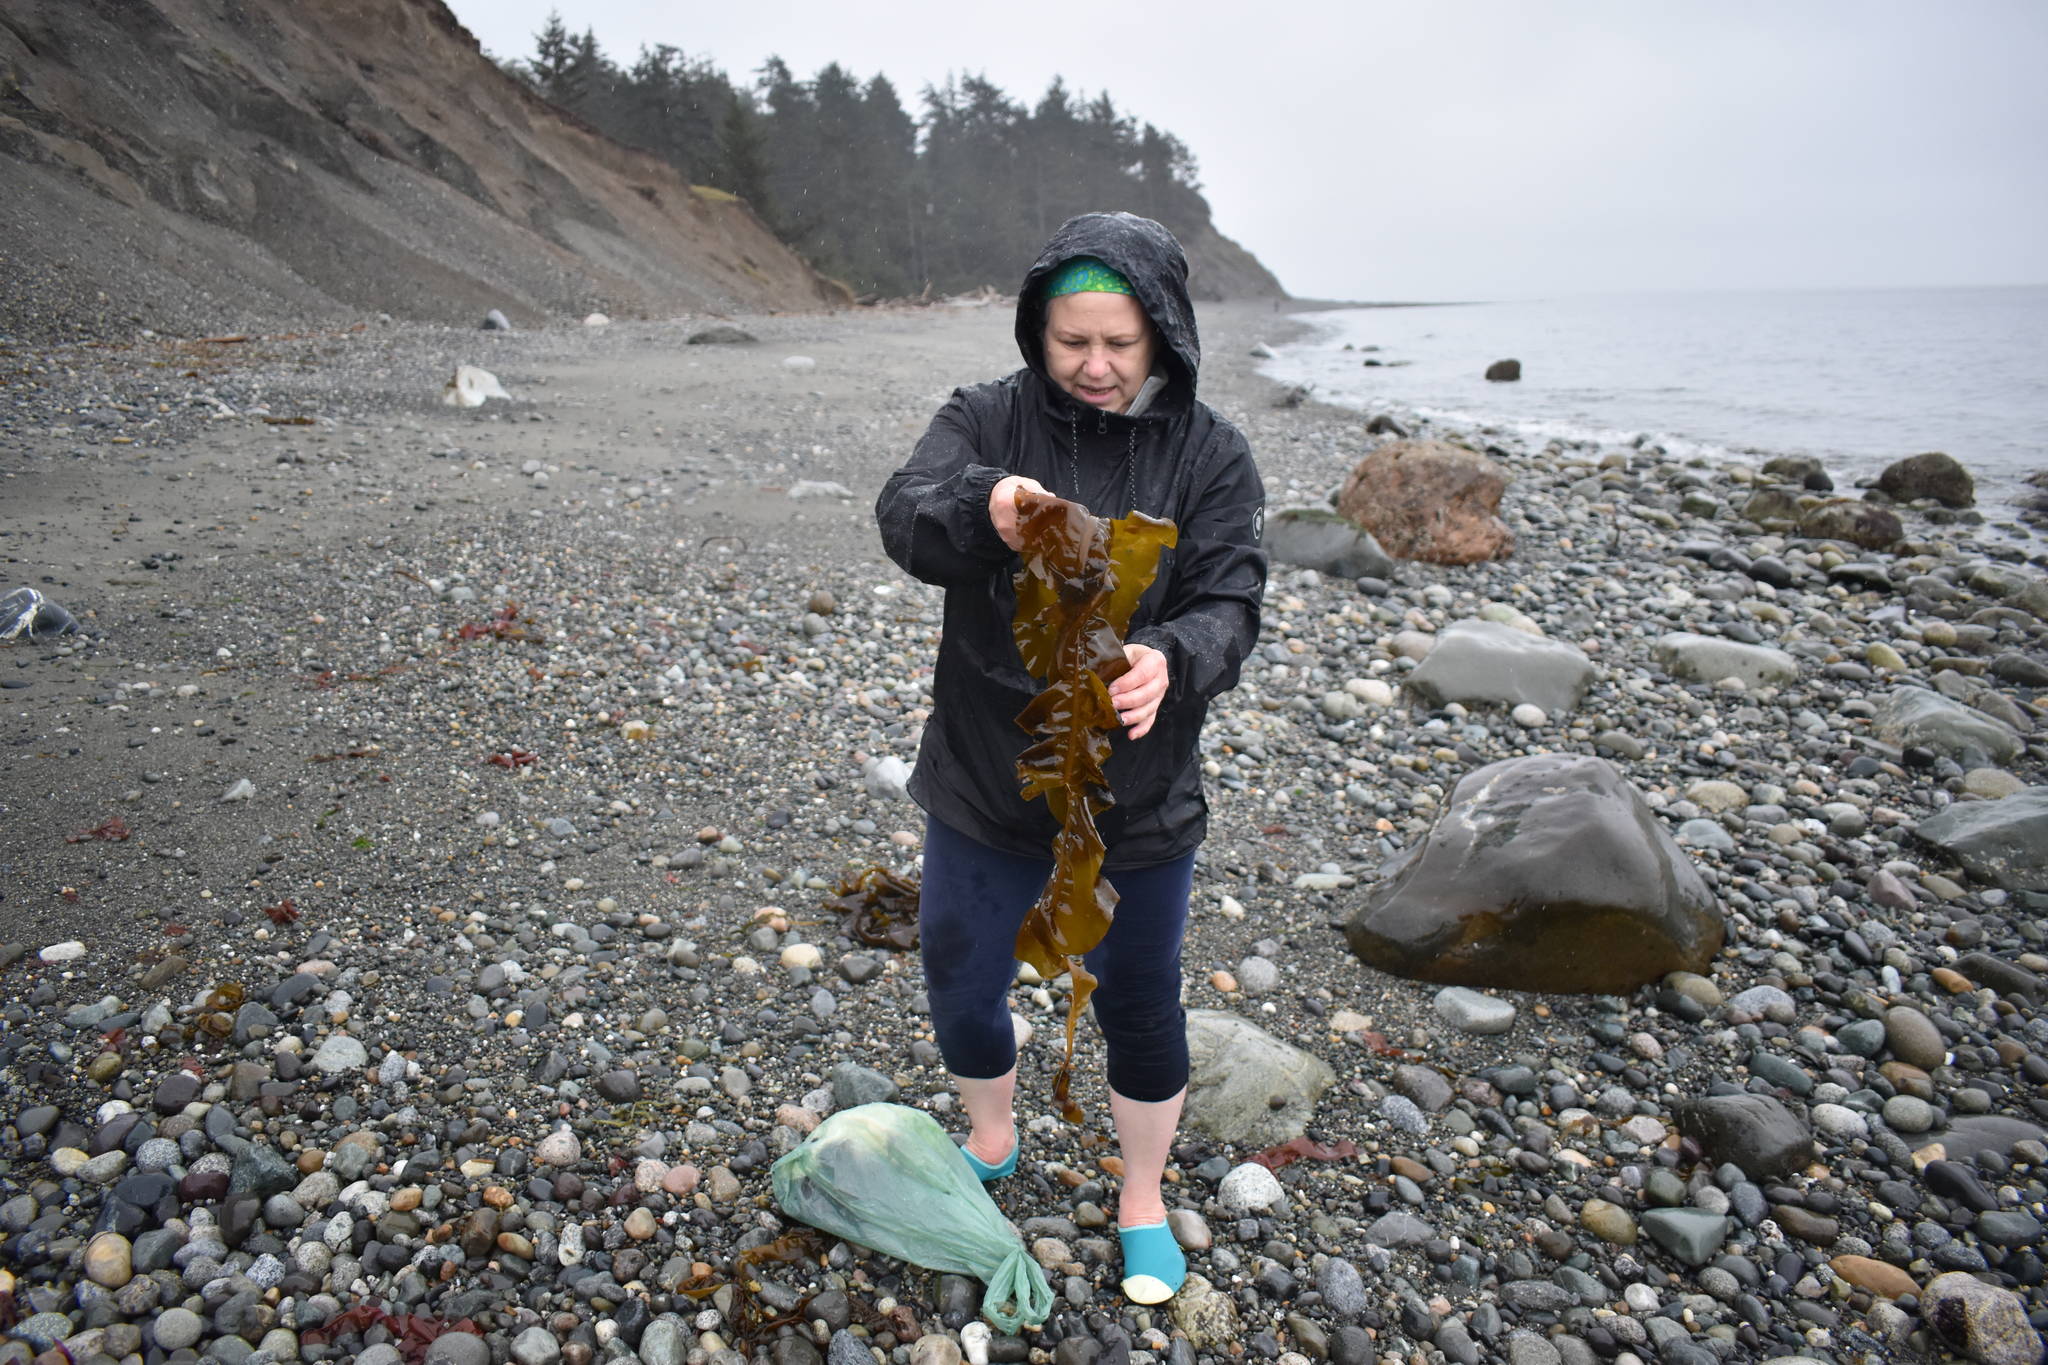 Photos by Emily Gilbert/Whidbey News-Times
Karen Achabal holds up a piece of kelp at Fort Ebey State Park on April 24. Seaweed harvesting at state parks is limited to April 15-May 15, although seaweed can be harvested from non-state park land at other times during the year.